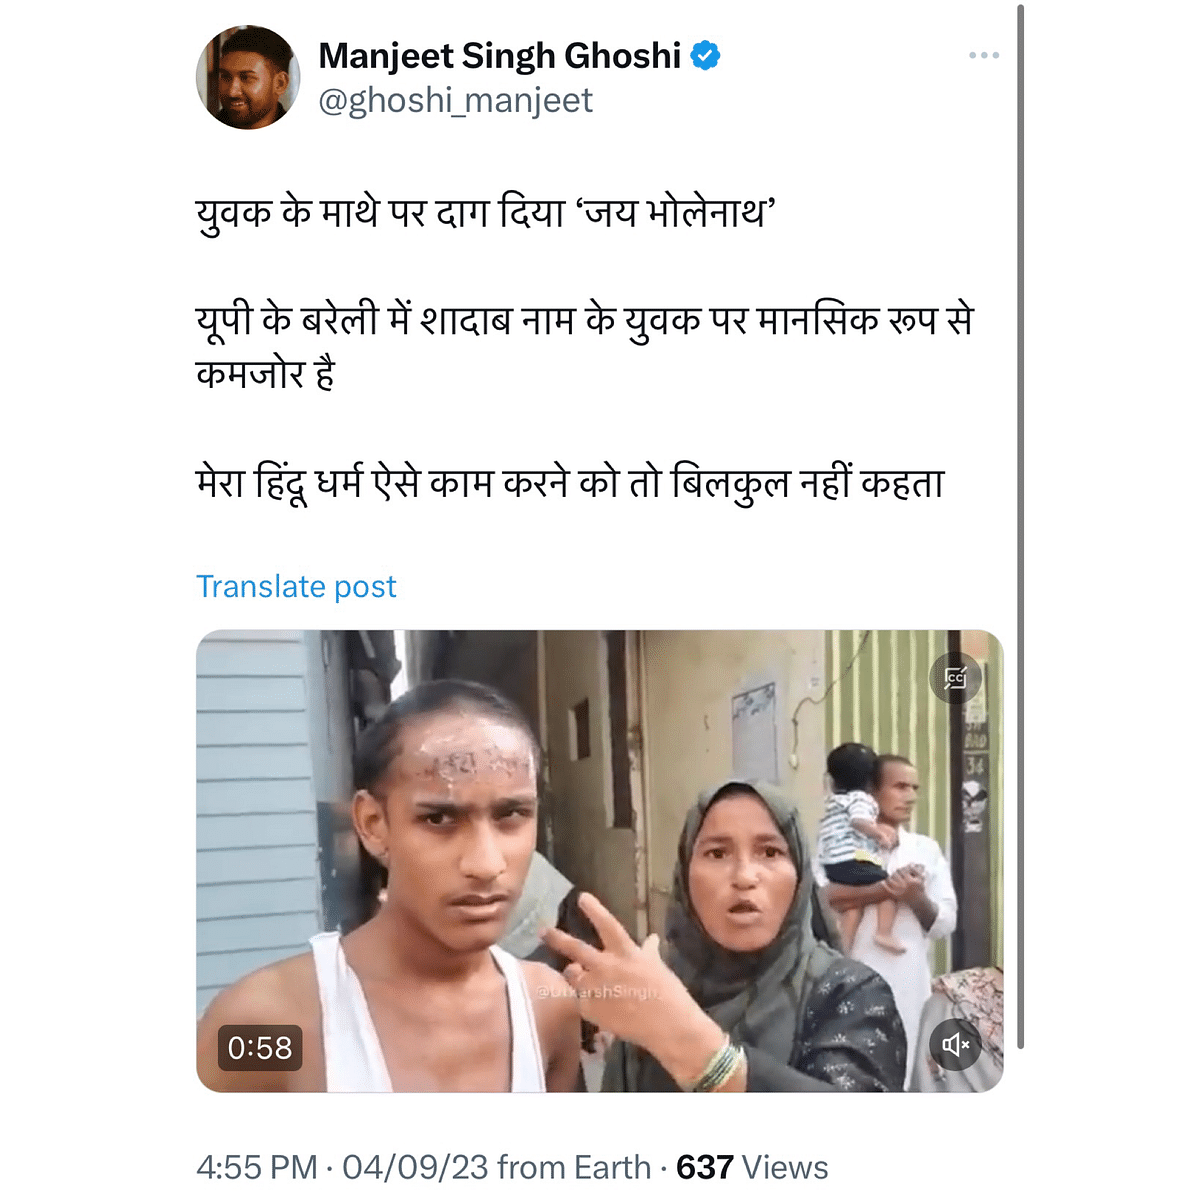 Did Hindus Carve 'Jai Bholenath' On Muslim Boy's Forehead With Knife In Bareilly? Fake Communal News Circulated On Social Media